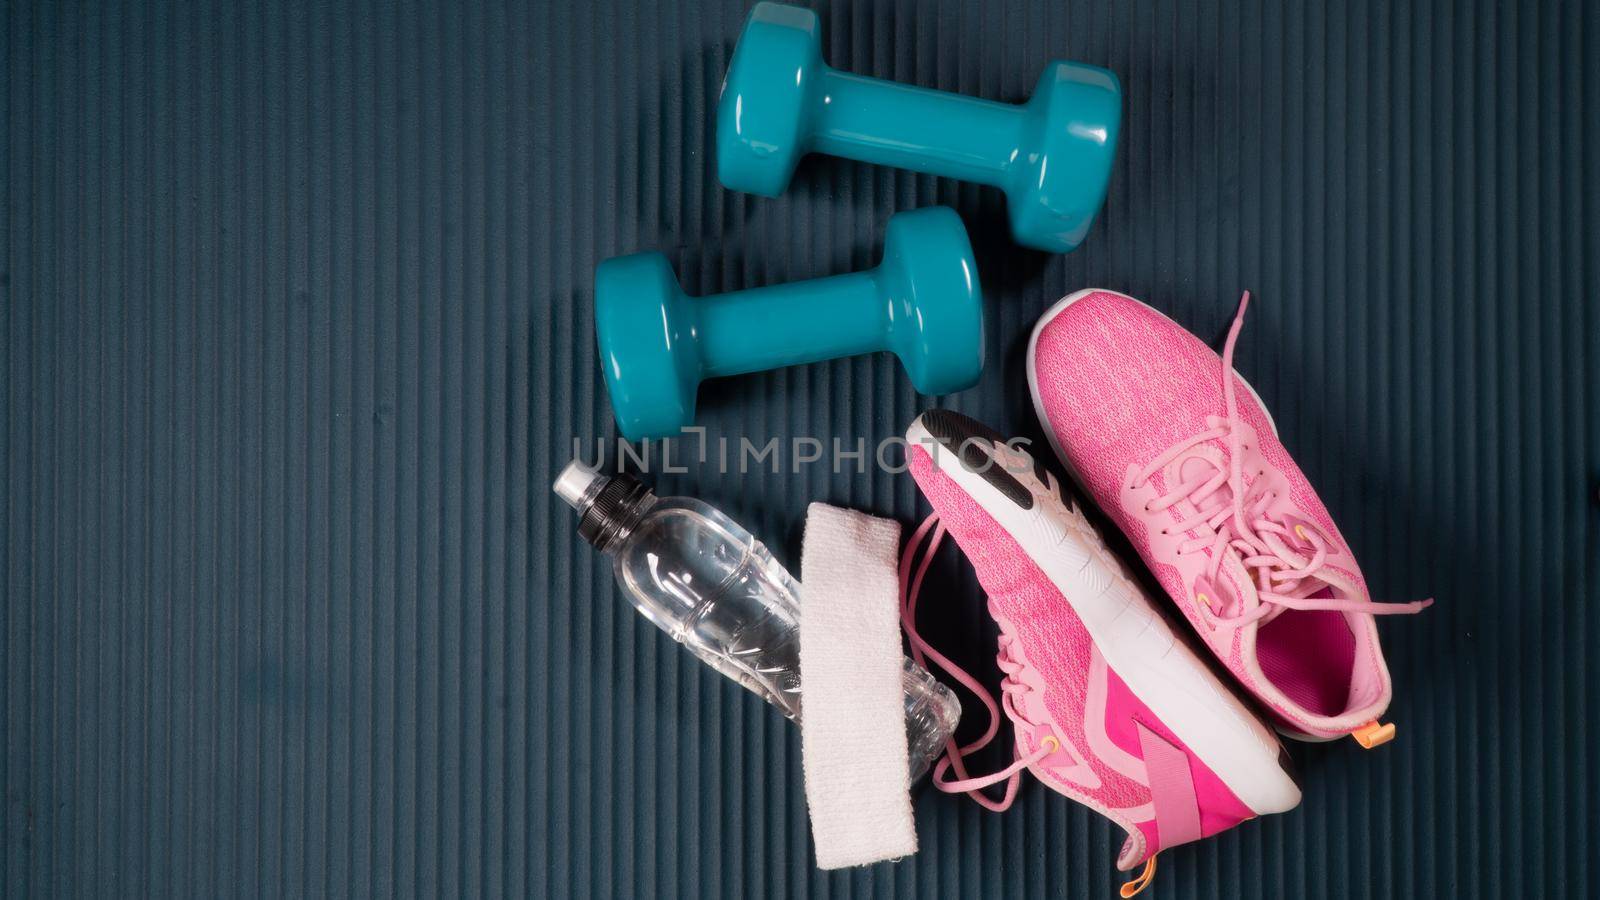 Gym workout kit - dumbbells with sneakers, bottle of water, towel and Buff. High quality photo